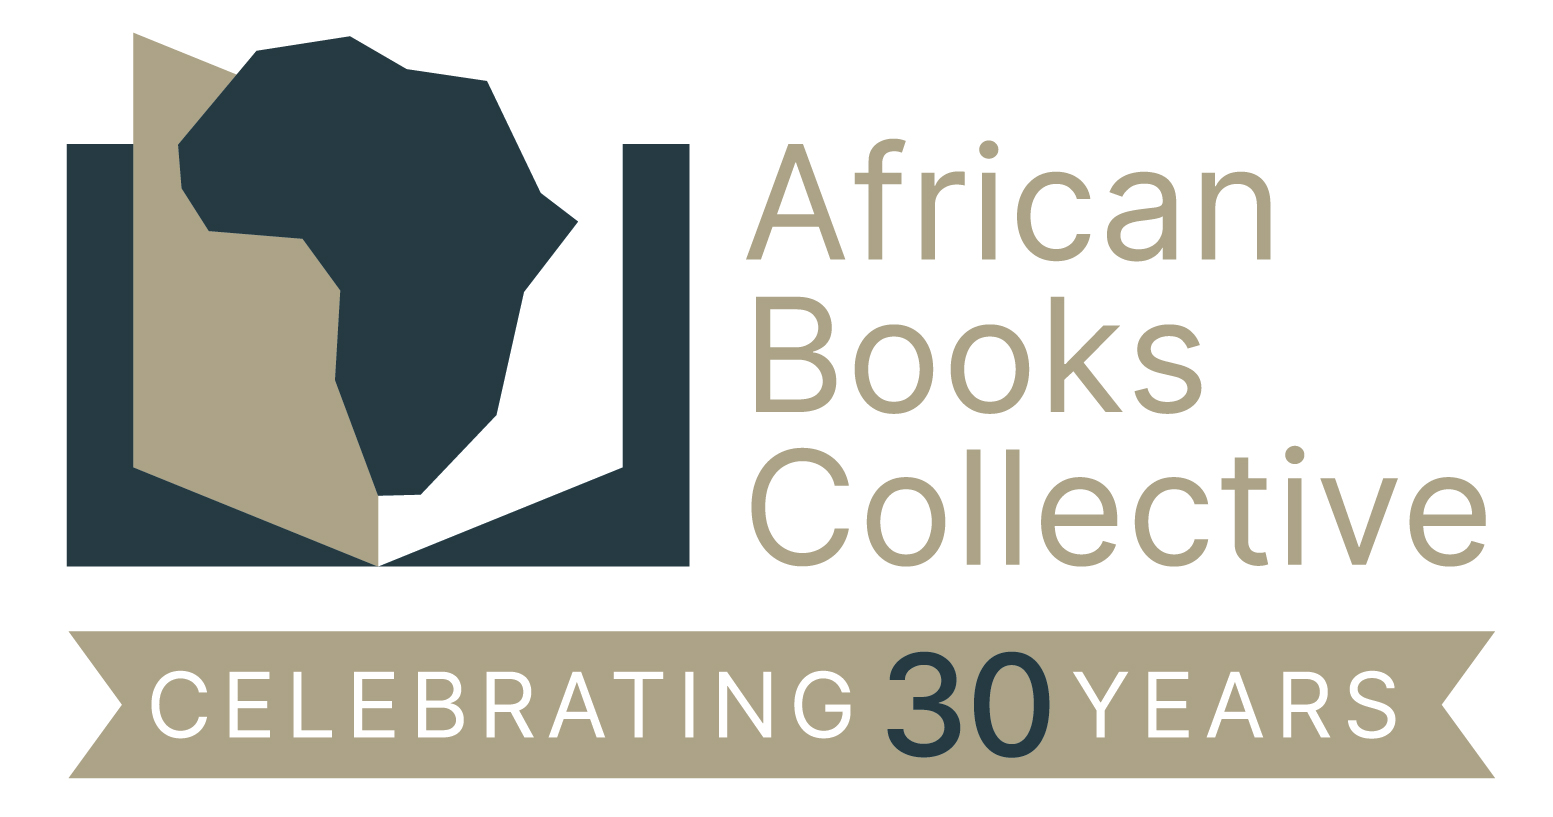 African Studies Association African Books Collective